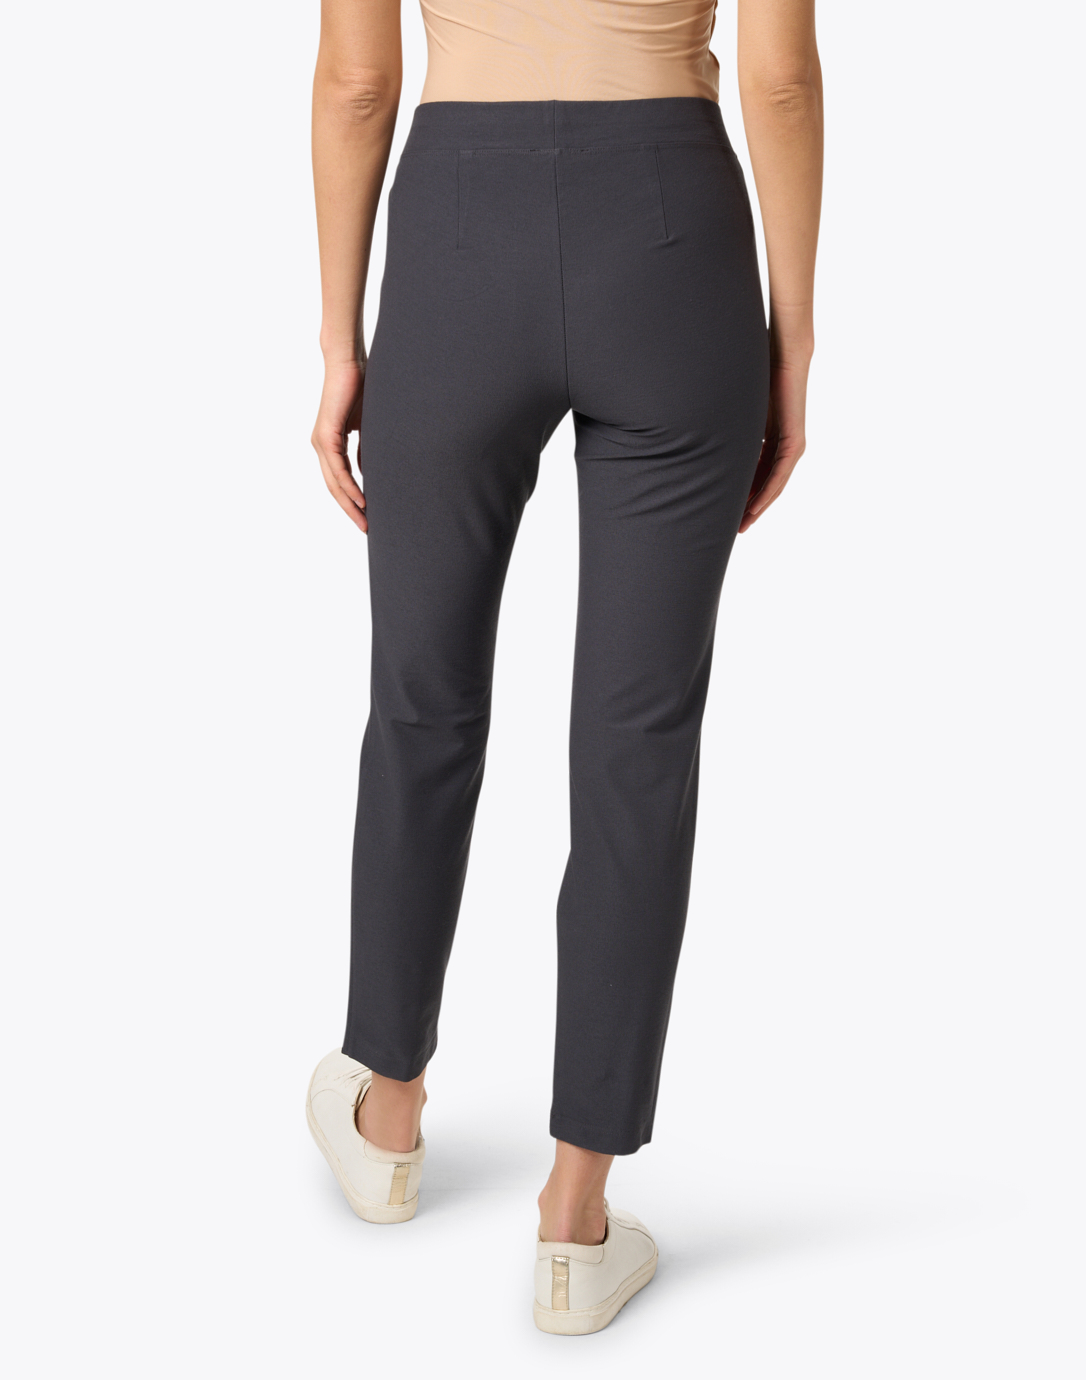 Buy the Eileen Fisher Slim Ankle in Graphite Washable Stretch